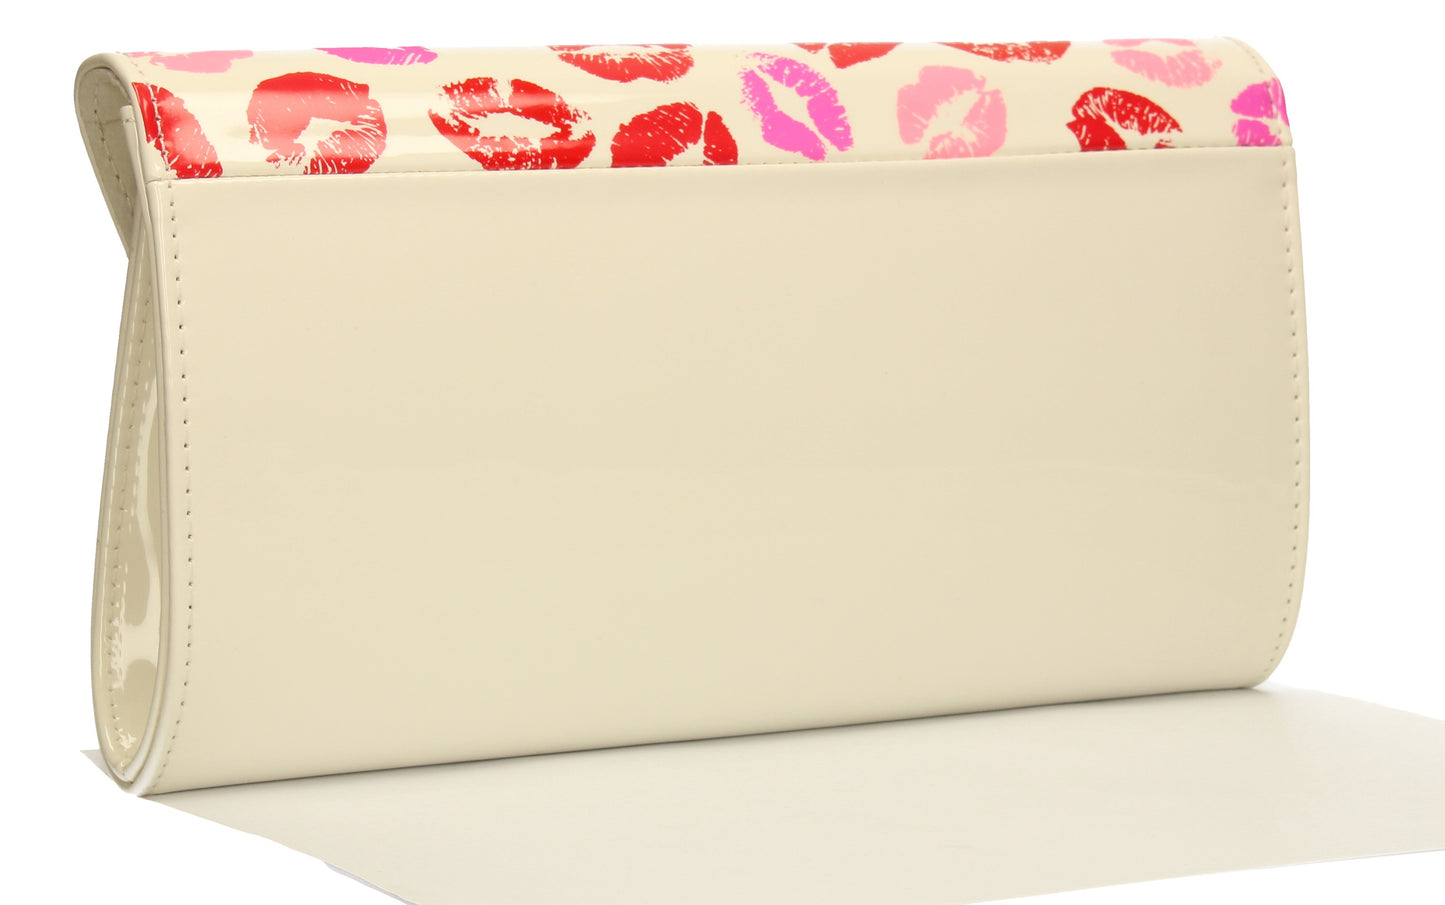 SWANKYSWANS Vicky Kiss Print Clutch Bag White Cute Cheap Clutch Bag For Weddings School and Work